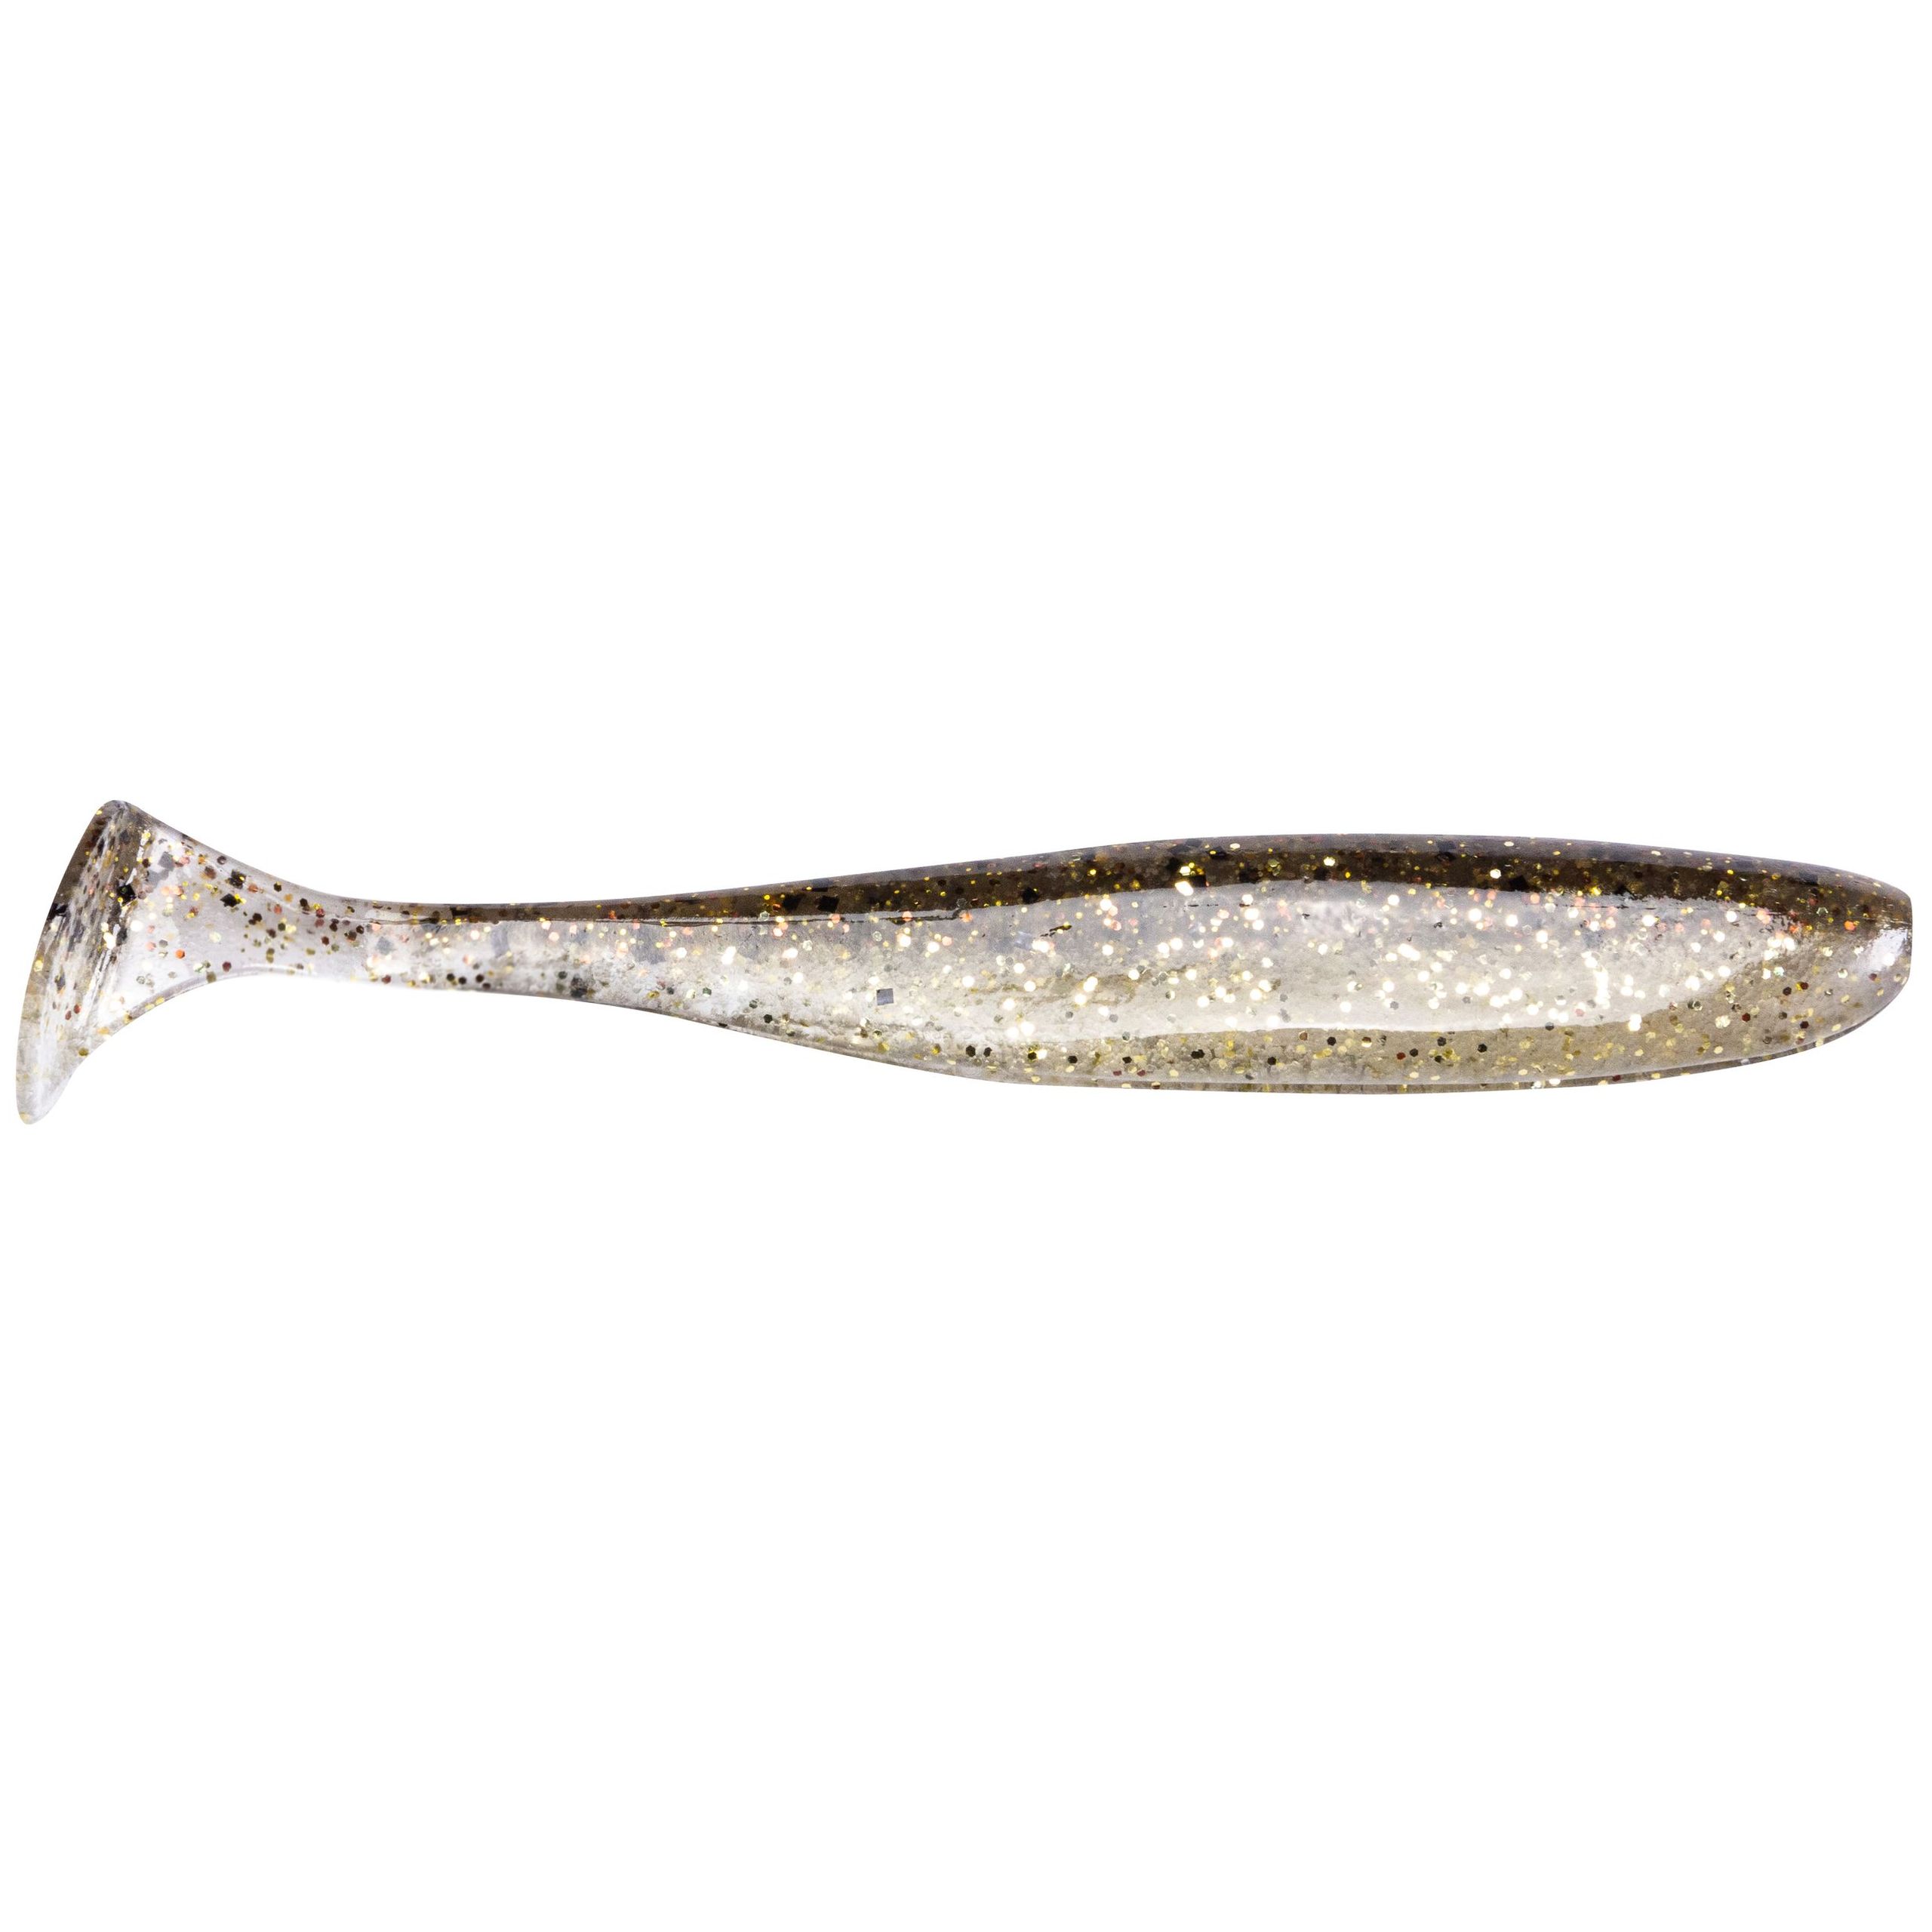 Keitech Easy Shiner 2 - Gold Flash Minnow - Limited Edition